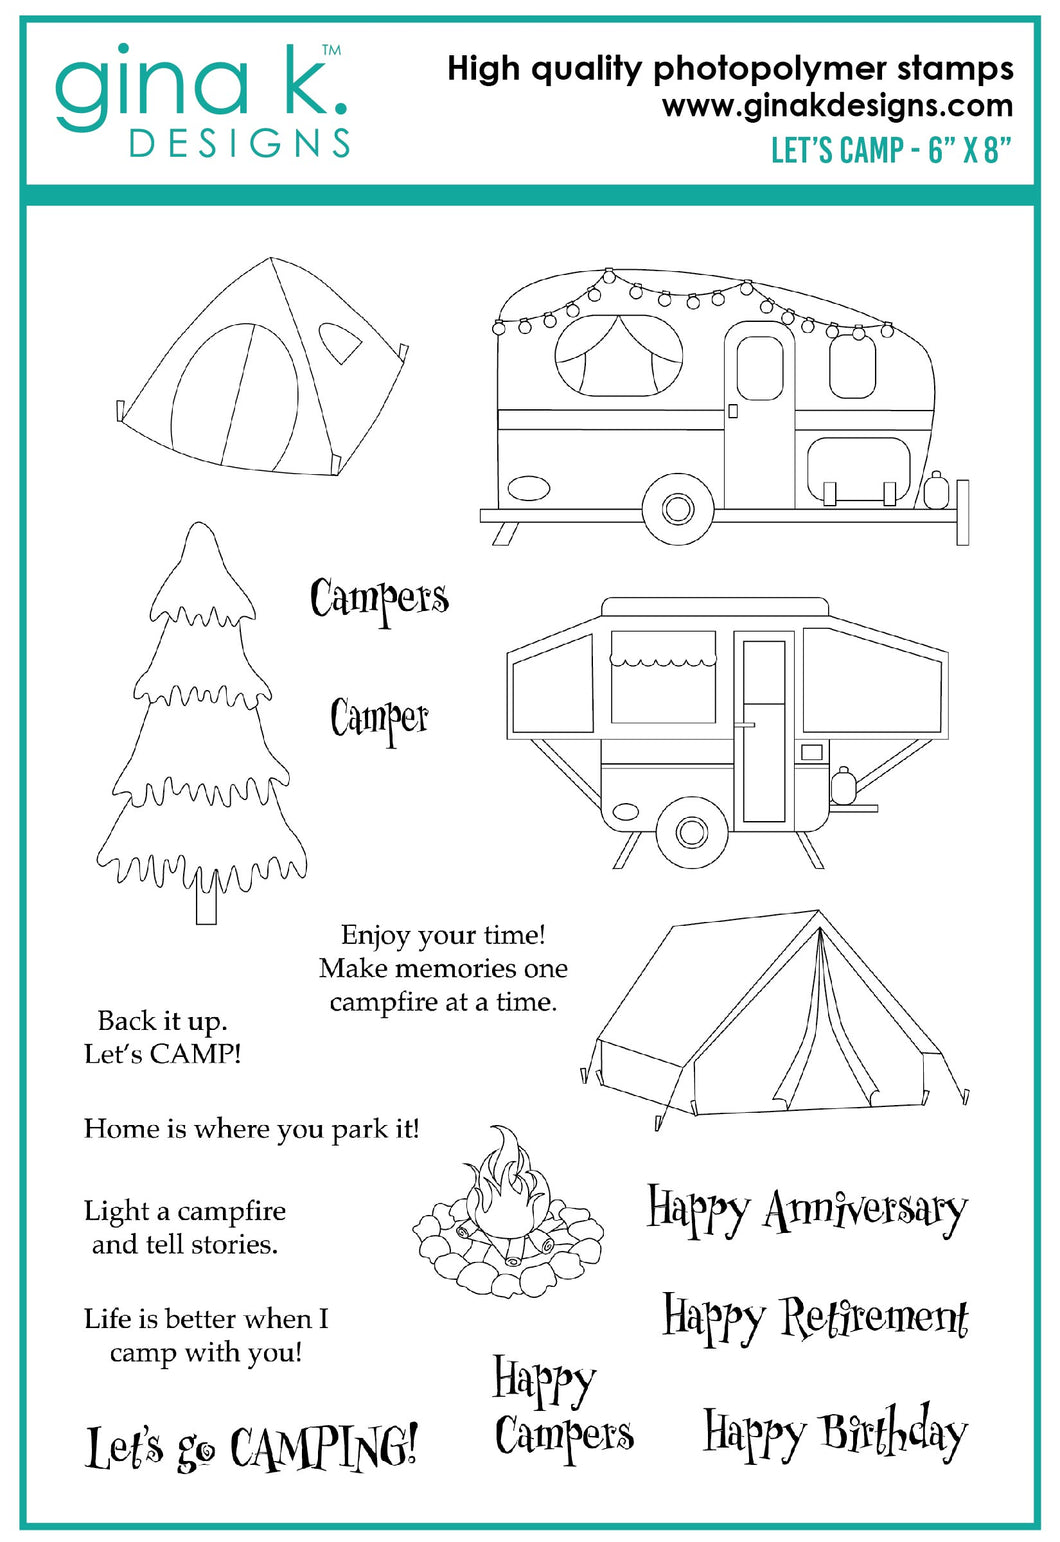 Gina K. Designs - Stamps - Let's Camp. Let's Camp is a stamp set by Debrah Warner. This set is made of premium clear photopolymer and measures 6